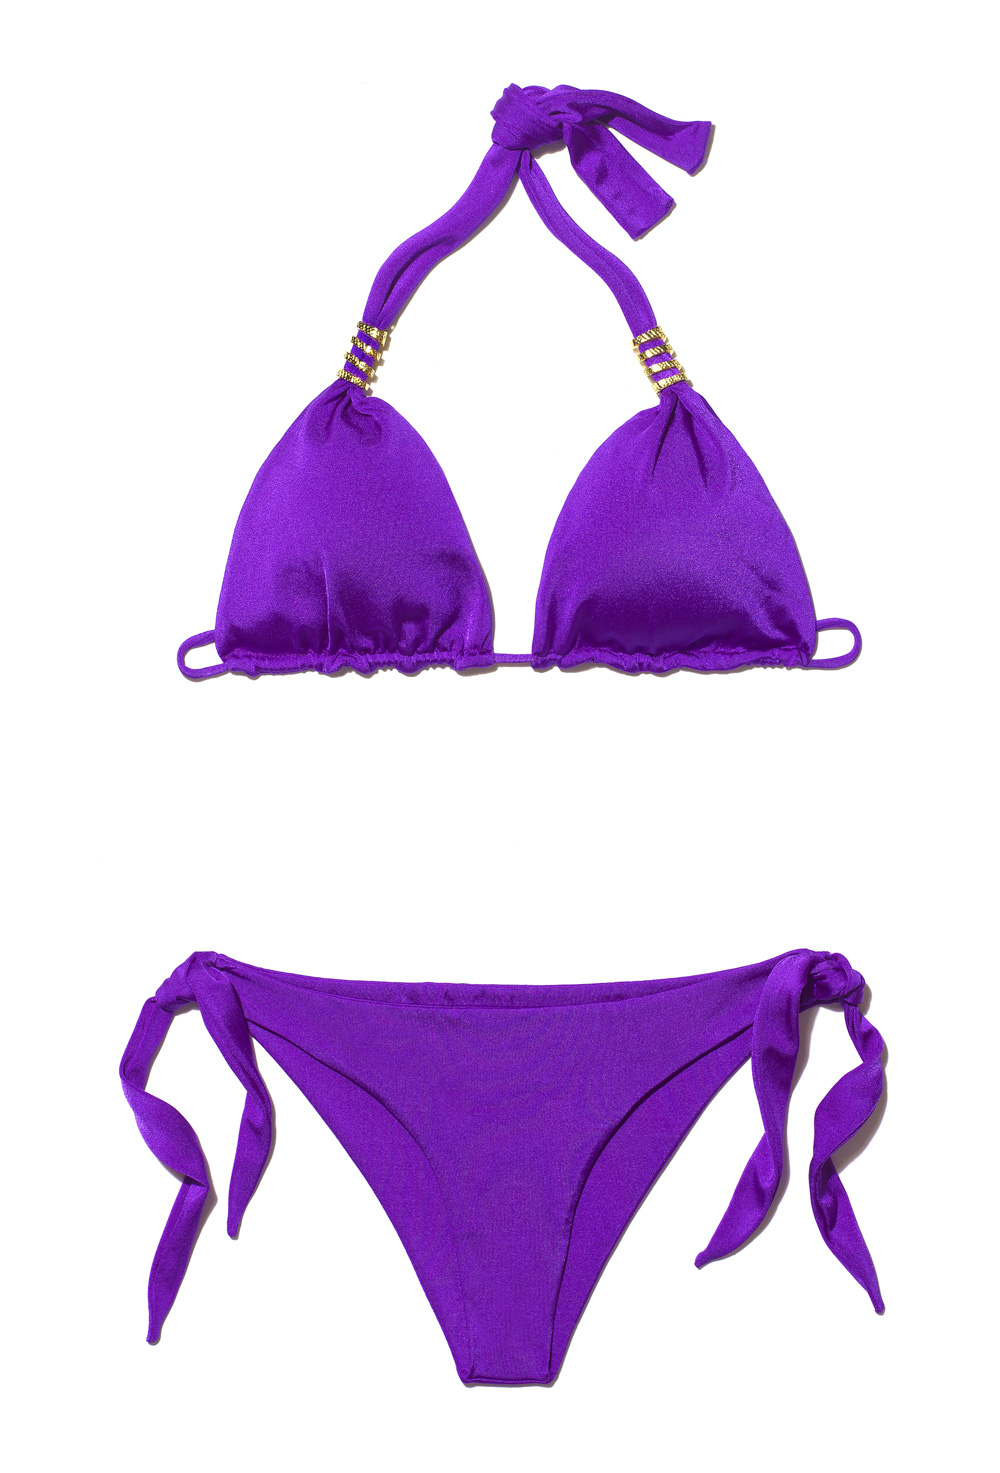 Bathing Suit Clipart - Free Clipart Images of Swimsuits